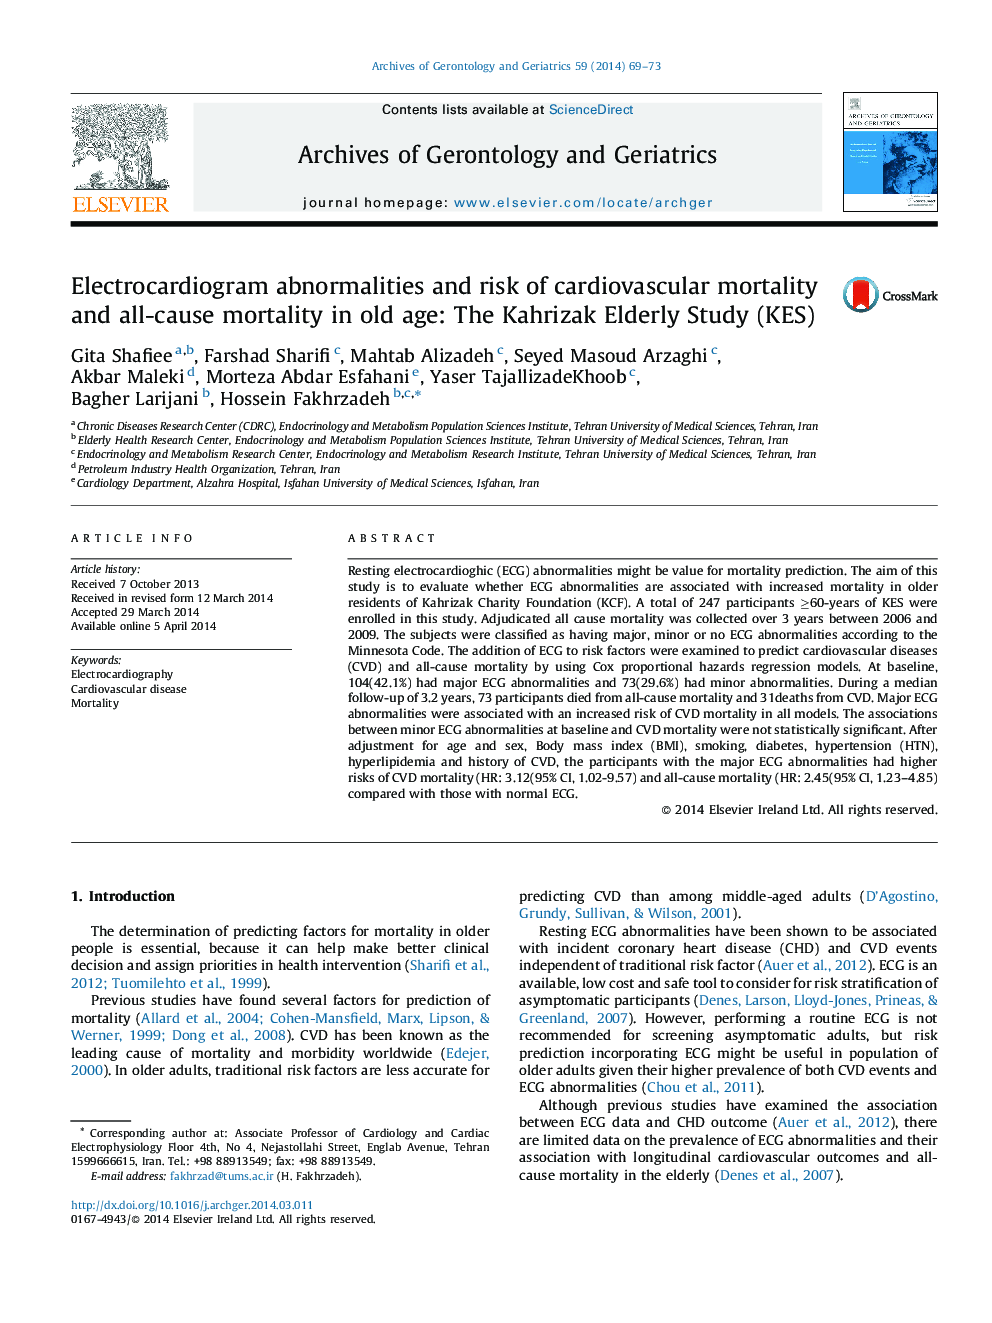 Electrocardiogram abnormalities and risk of cardiovascular mortality and all-cause mortality in old age: The Kahrizak Elderly Study (KES)